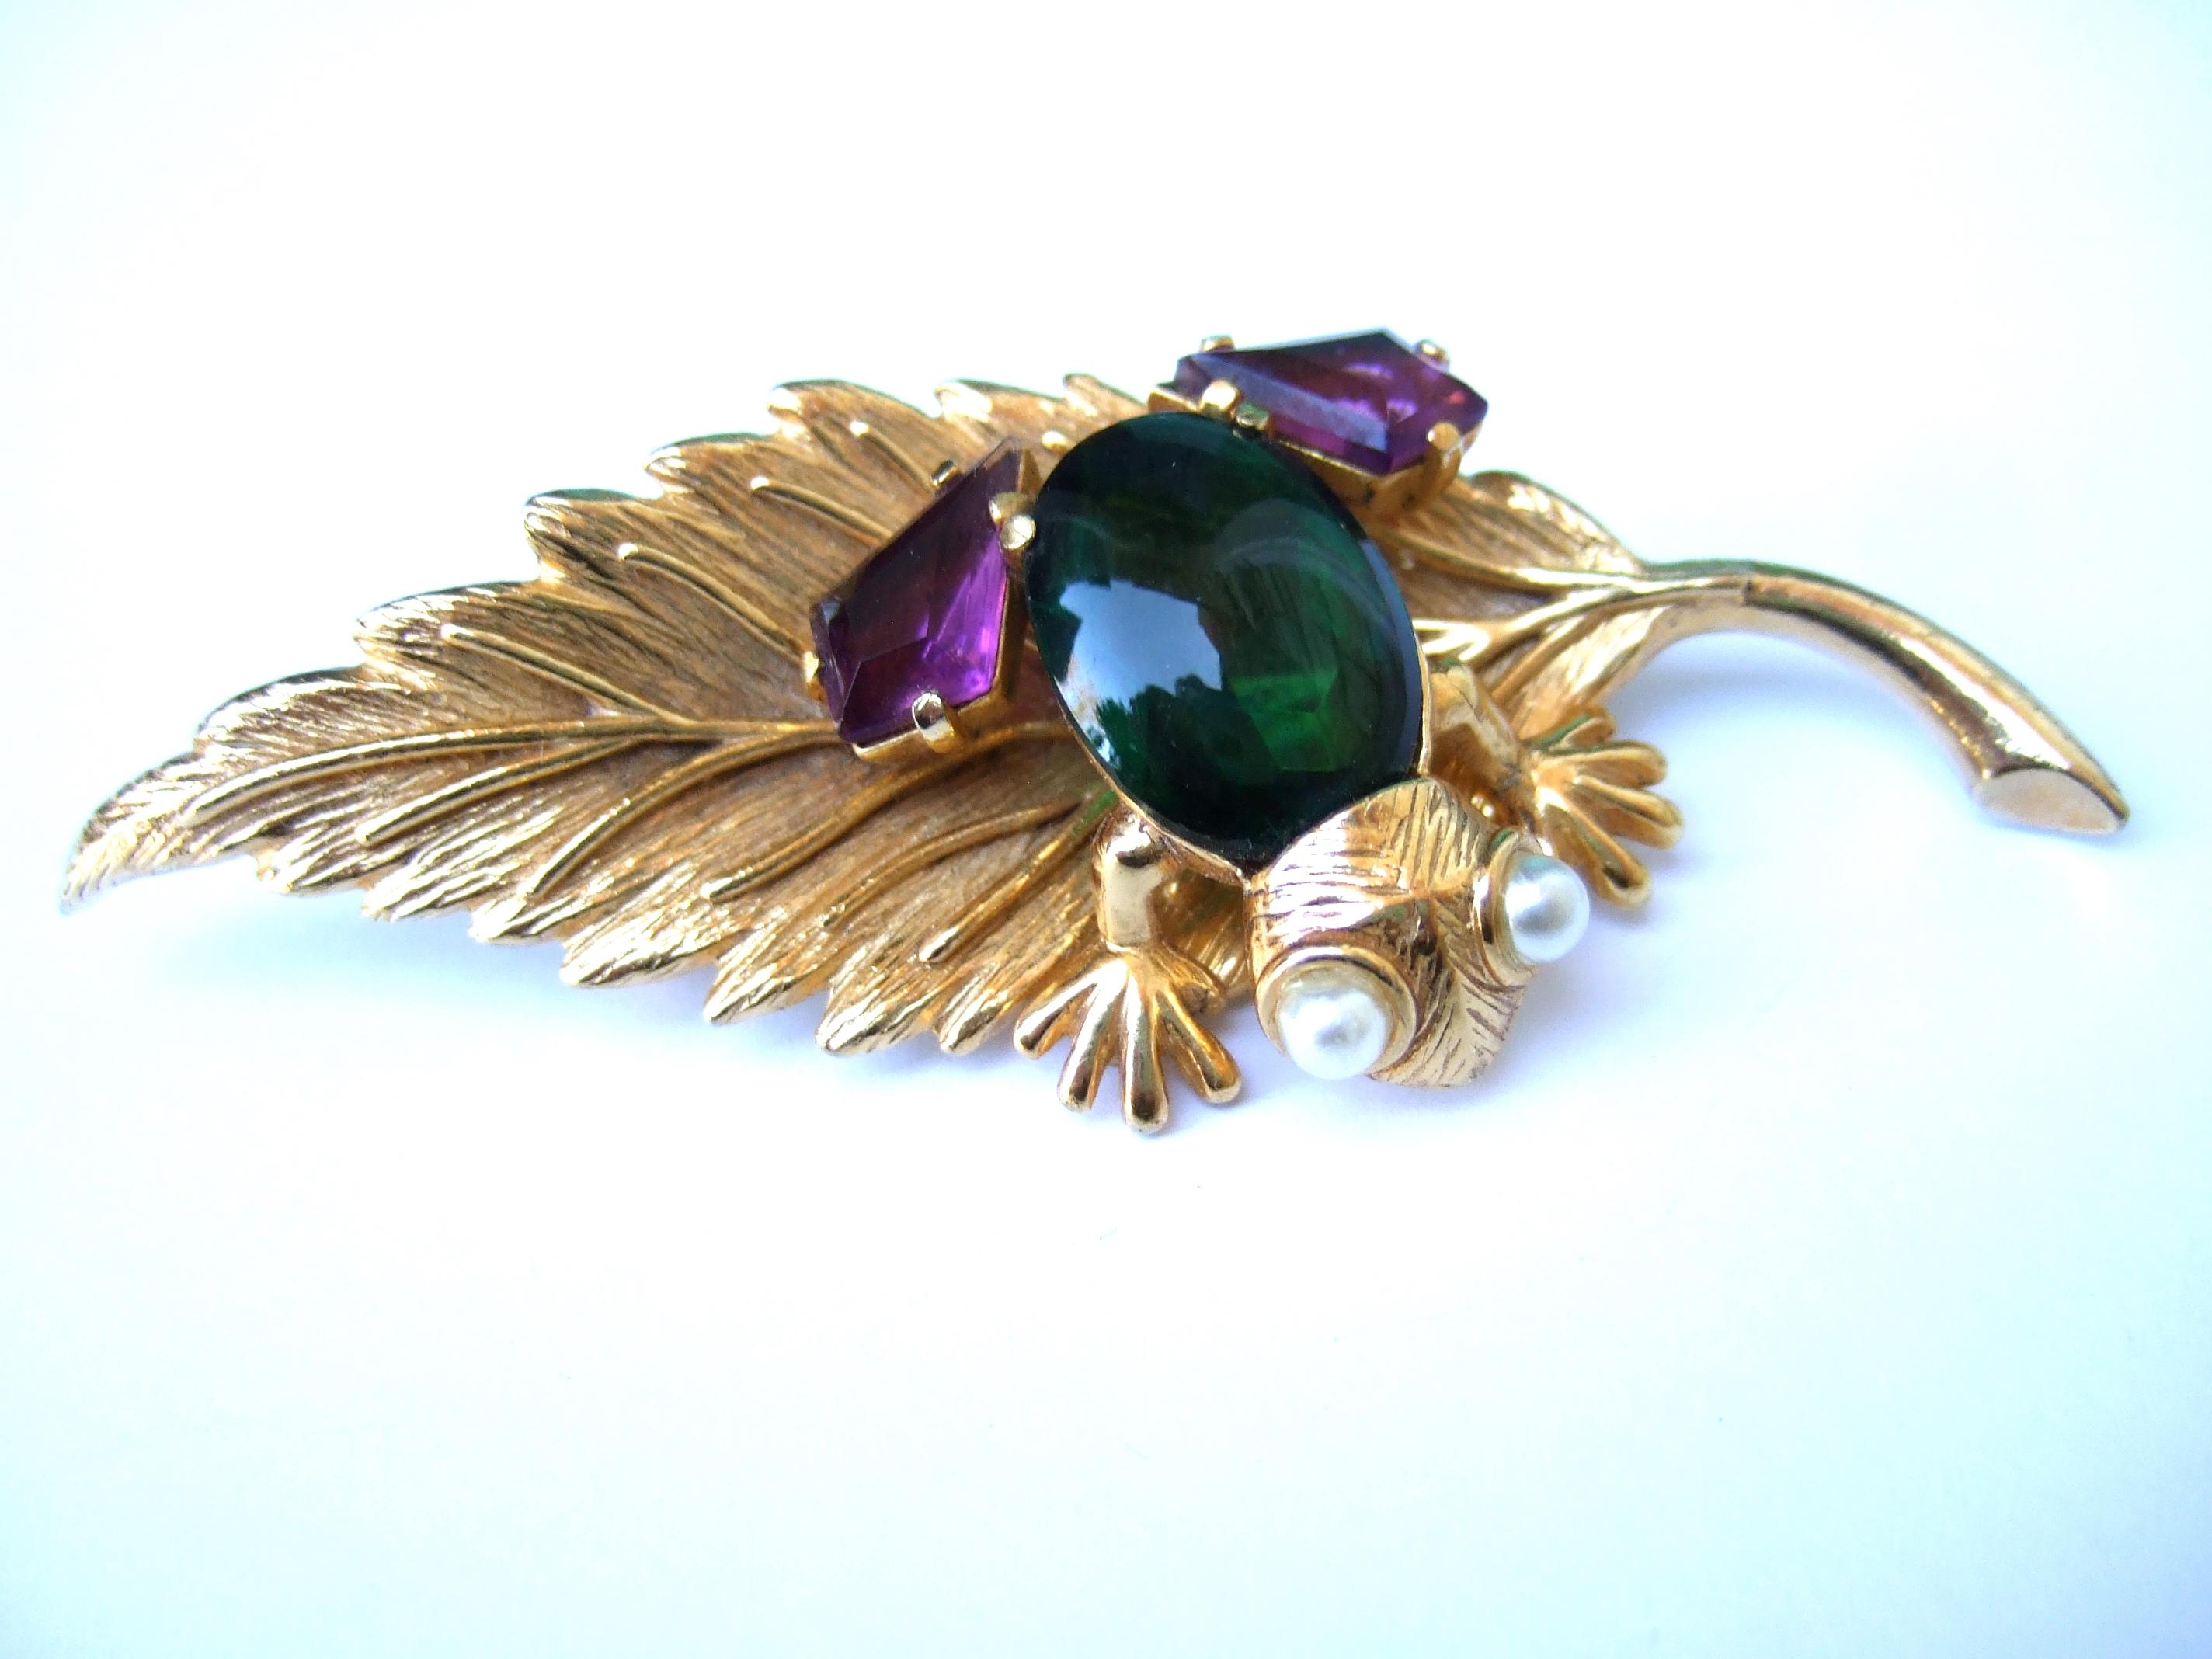 Schiaparelli Rare Charming Jeweled Frog Brooch c 1960 For Sale 1